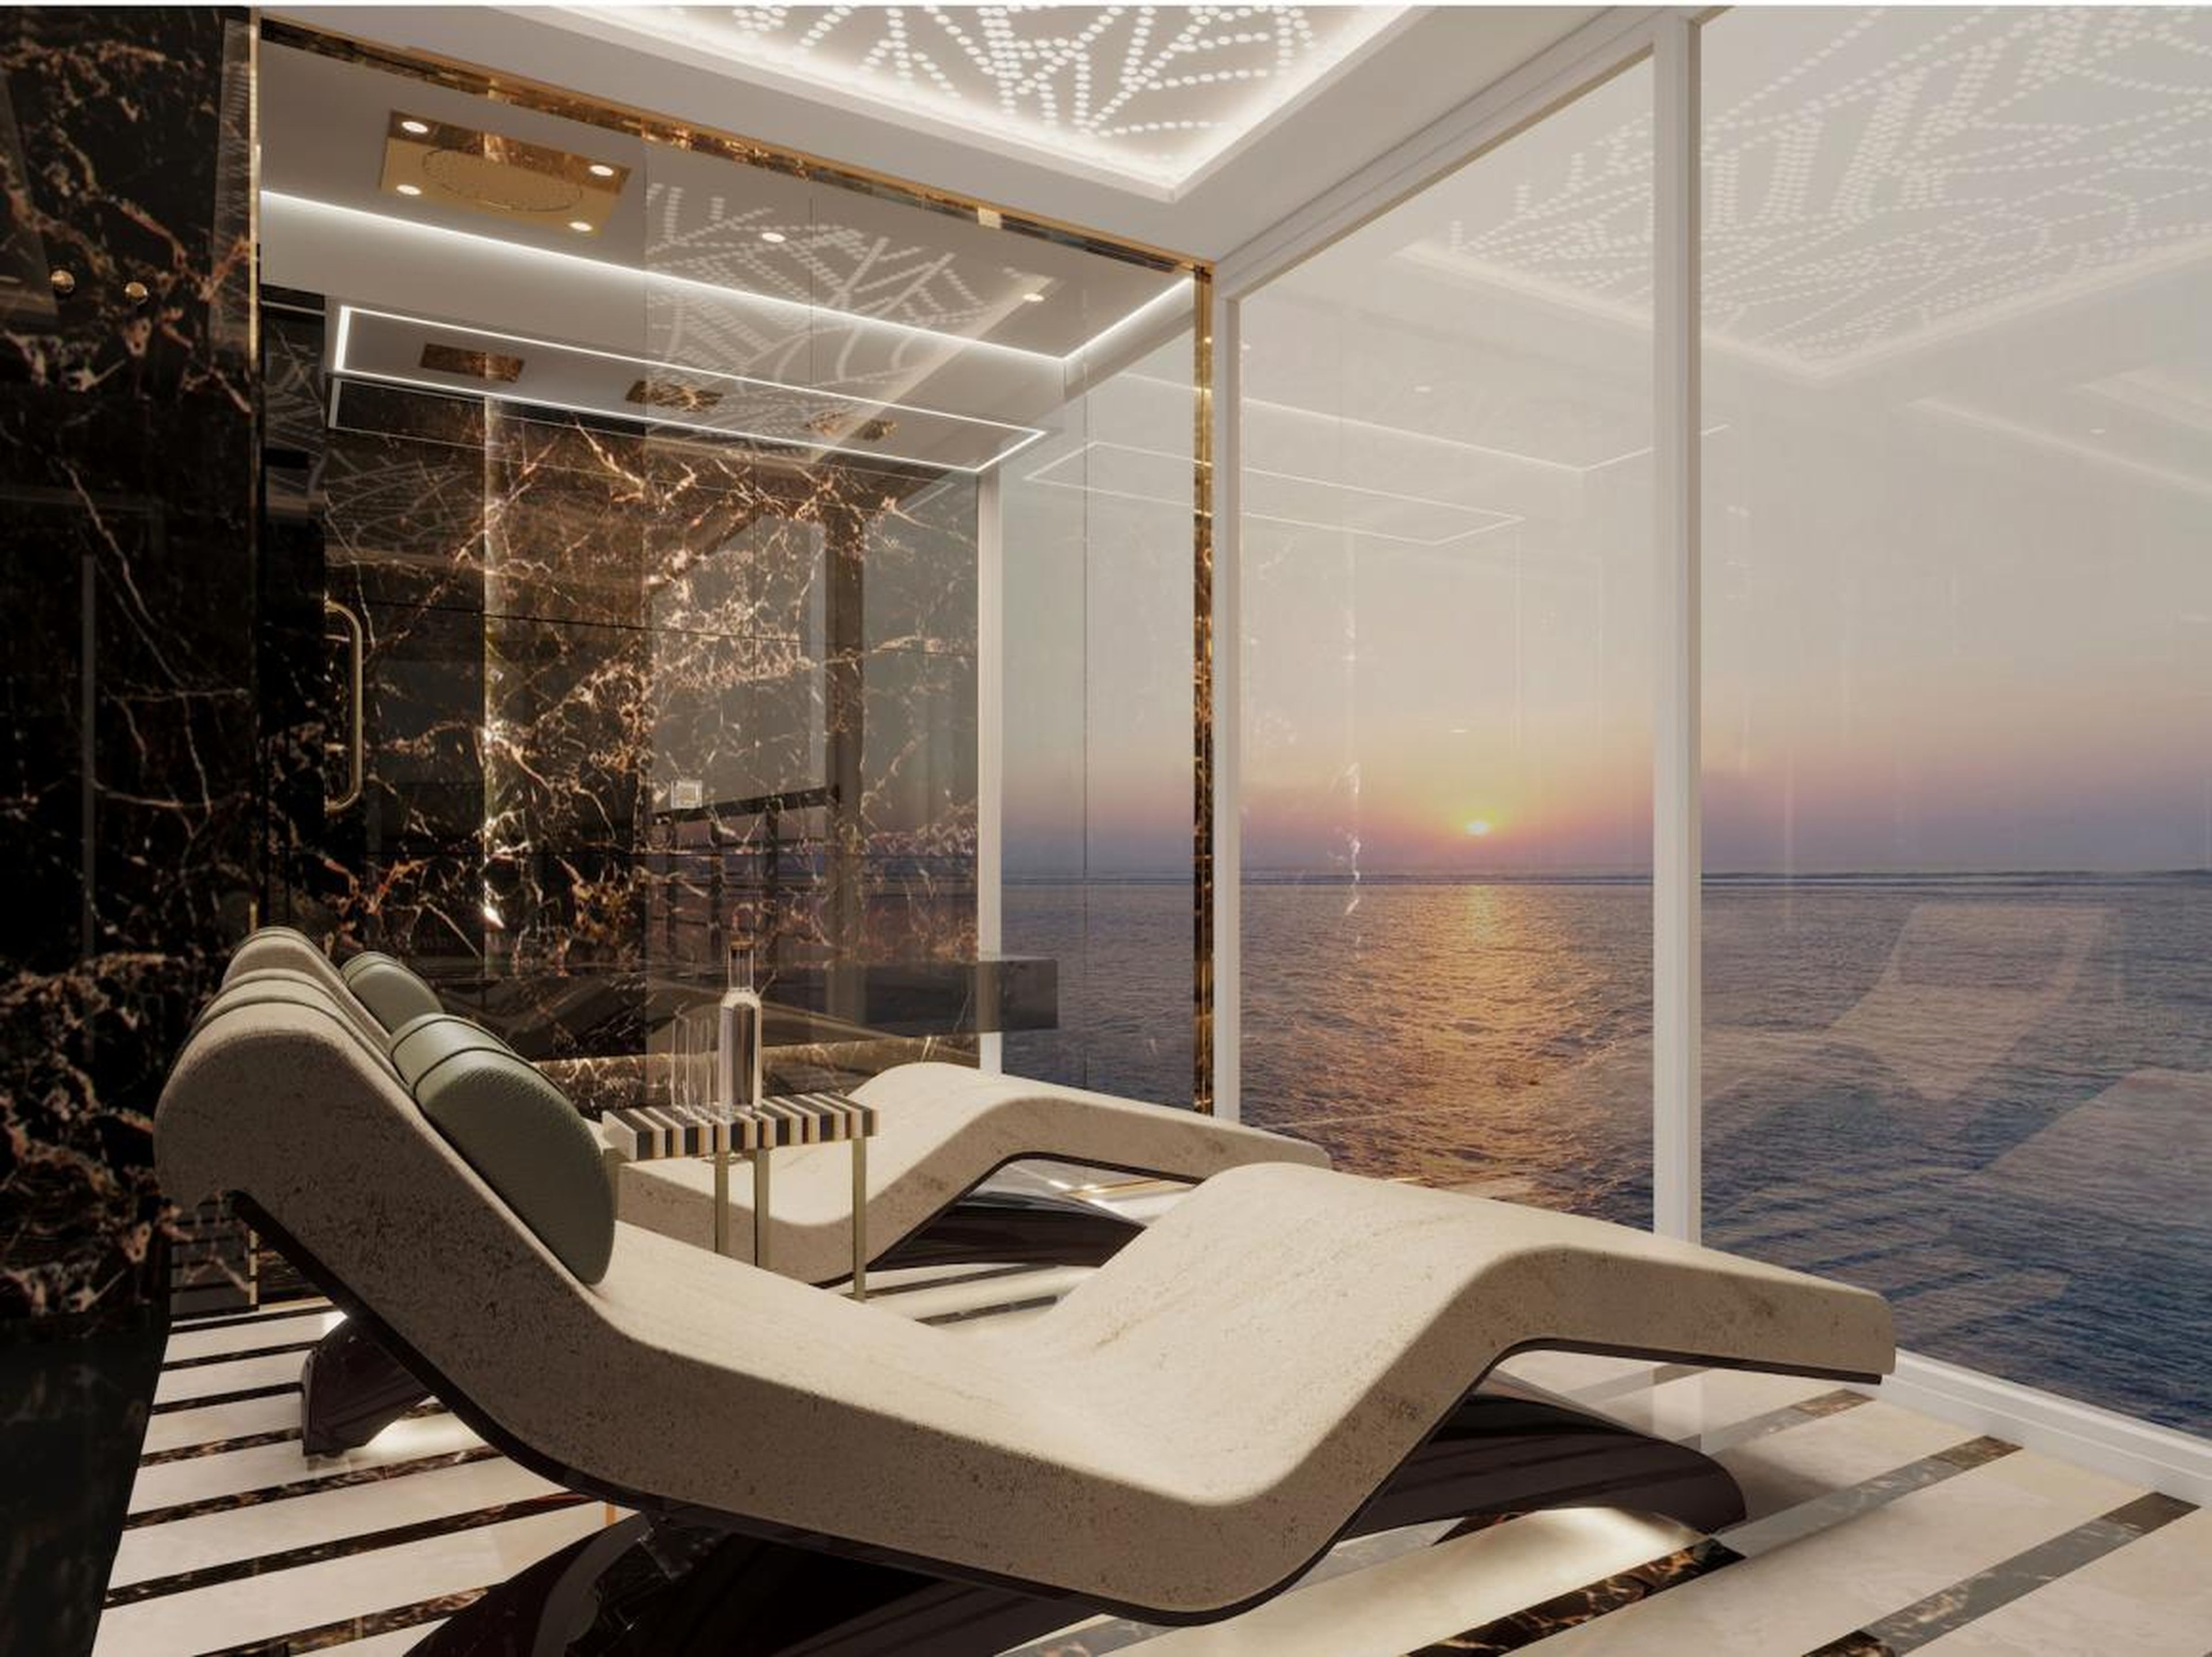 But the suite has already sold out for many of the Seven Seas Splendor's 2020 cruises, Regent said in January.